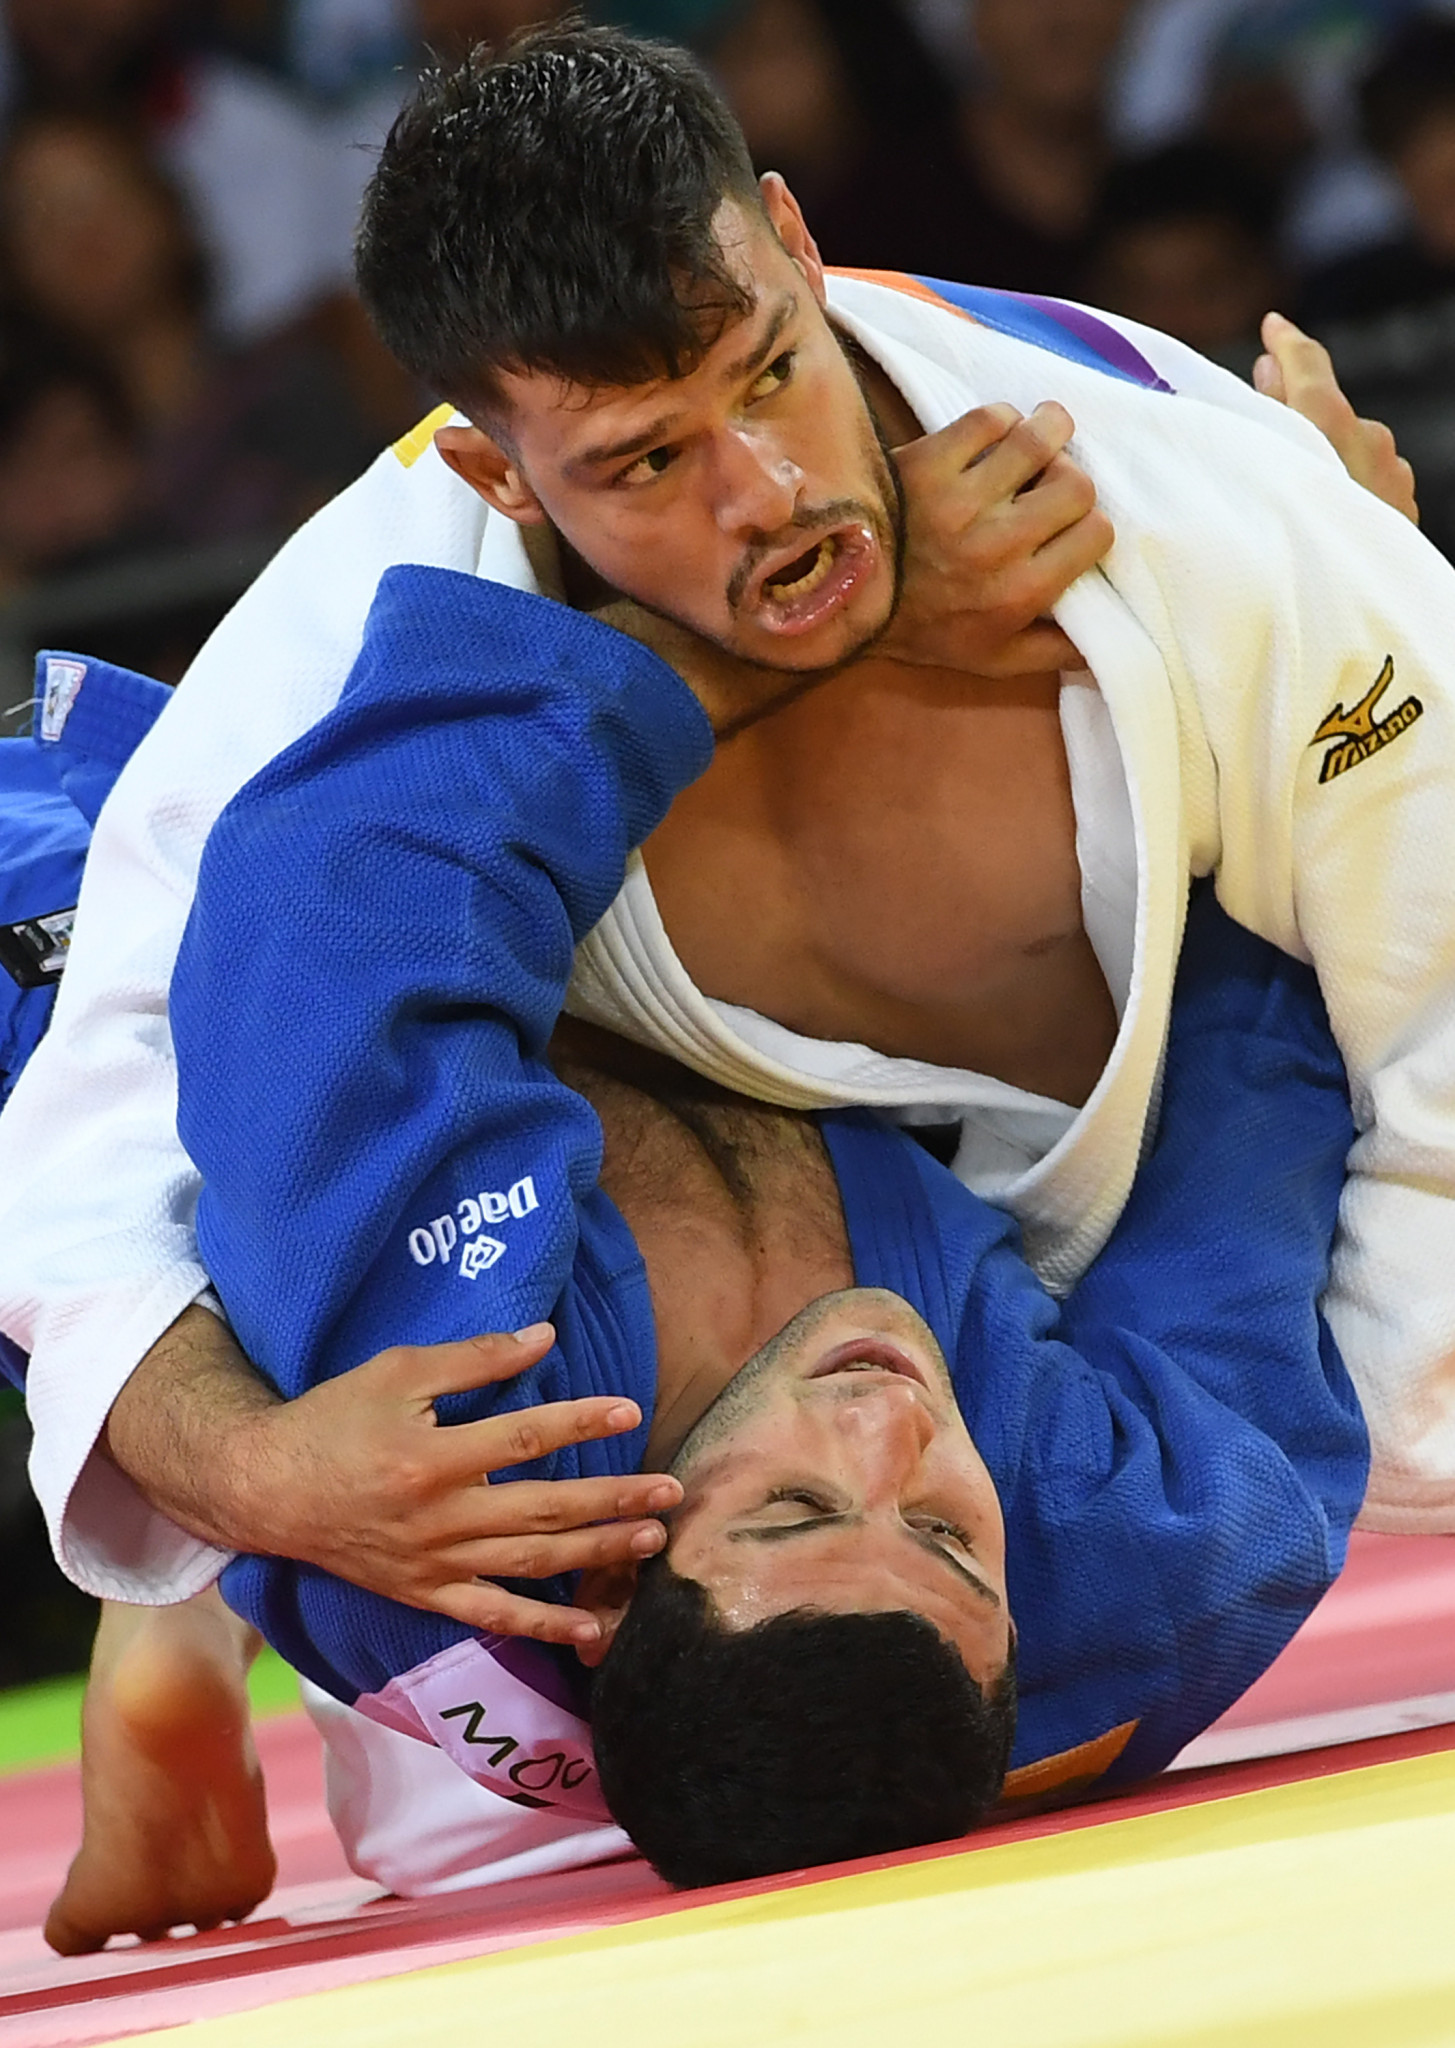 Judoka Diego Turcios was named as the male athlete of the year ©Getty Images